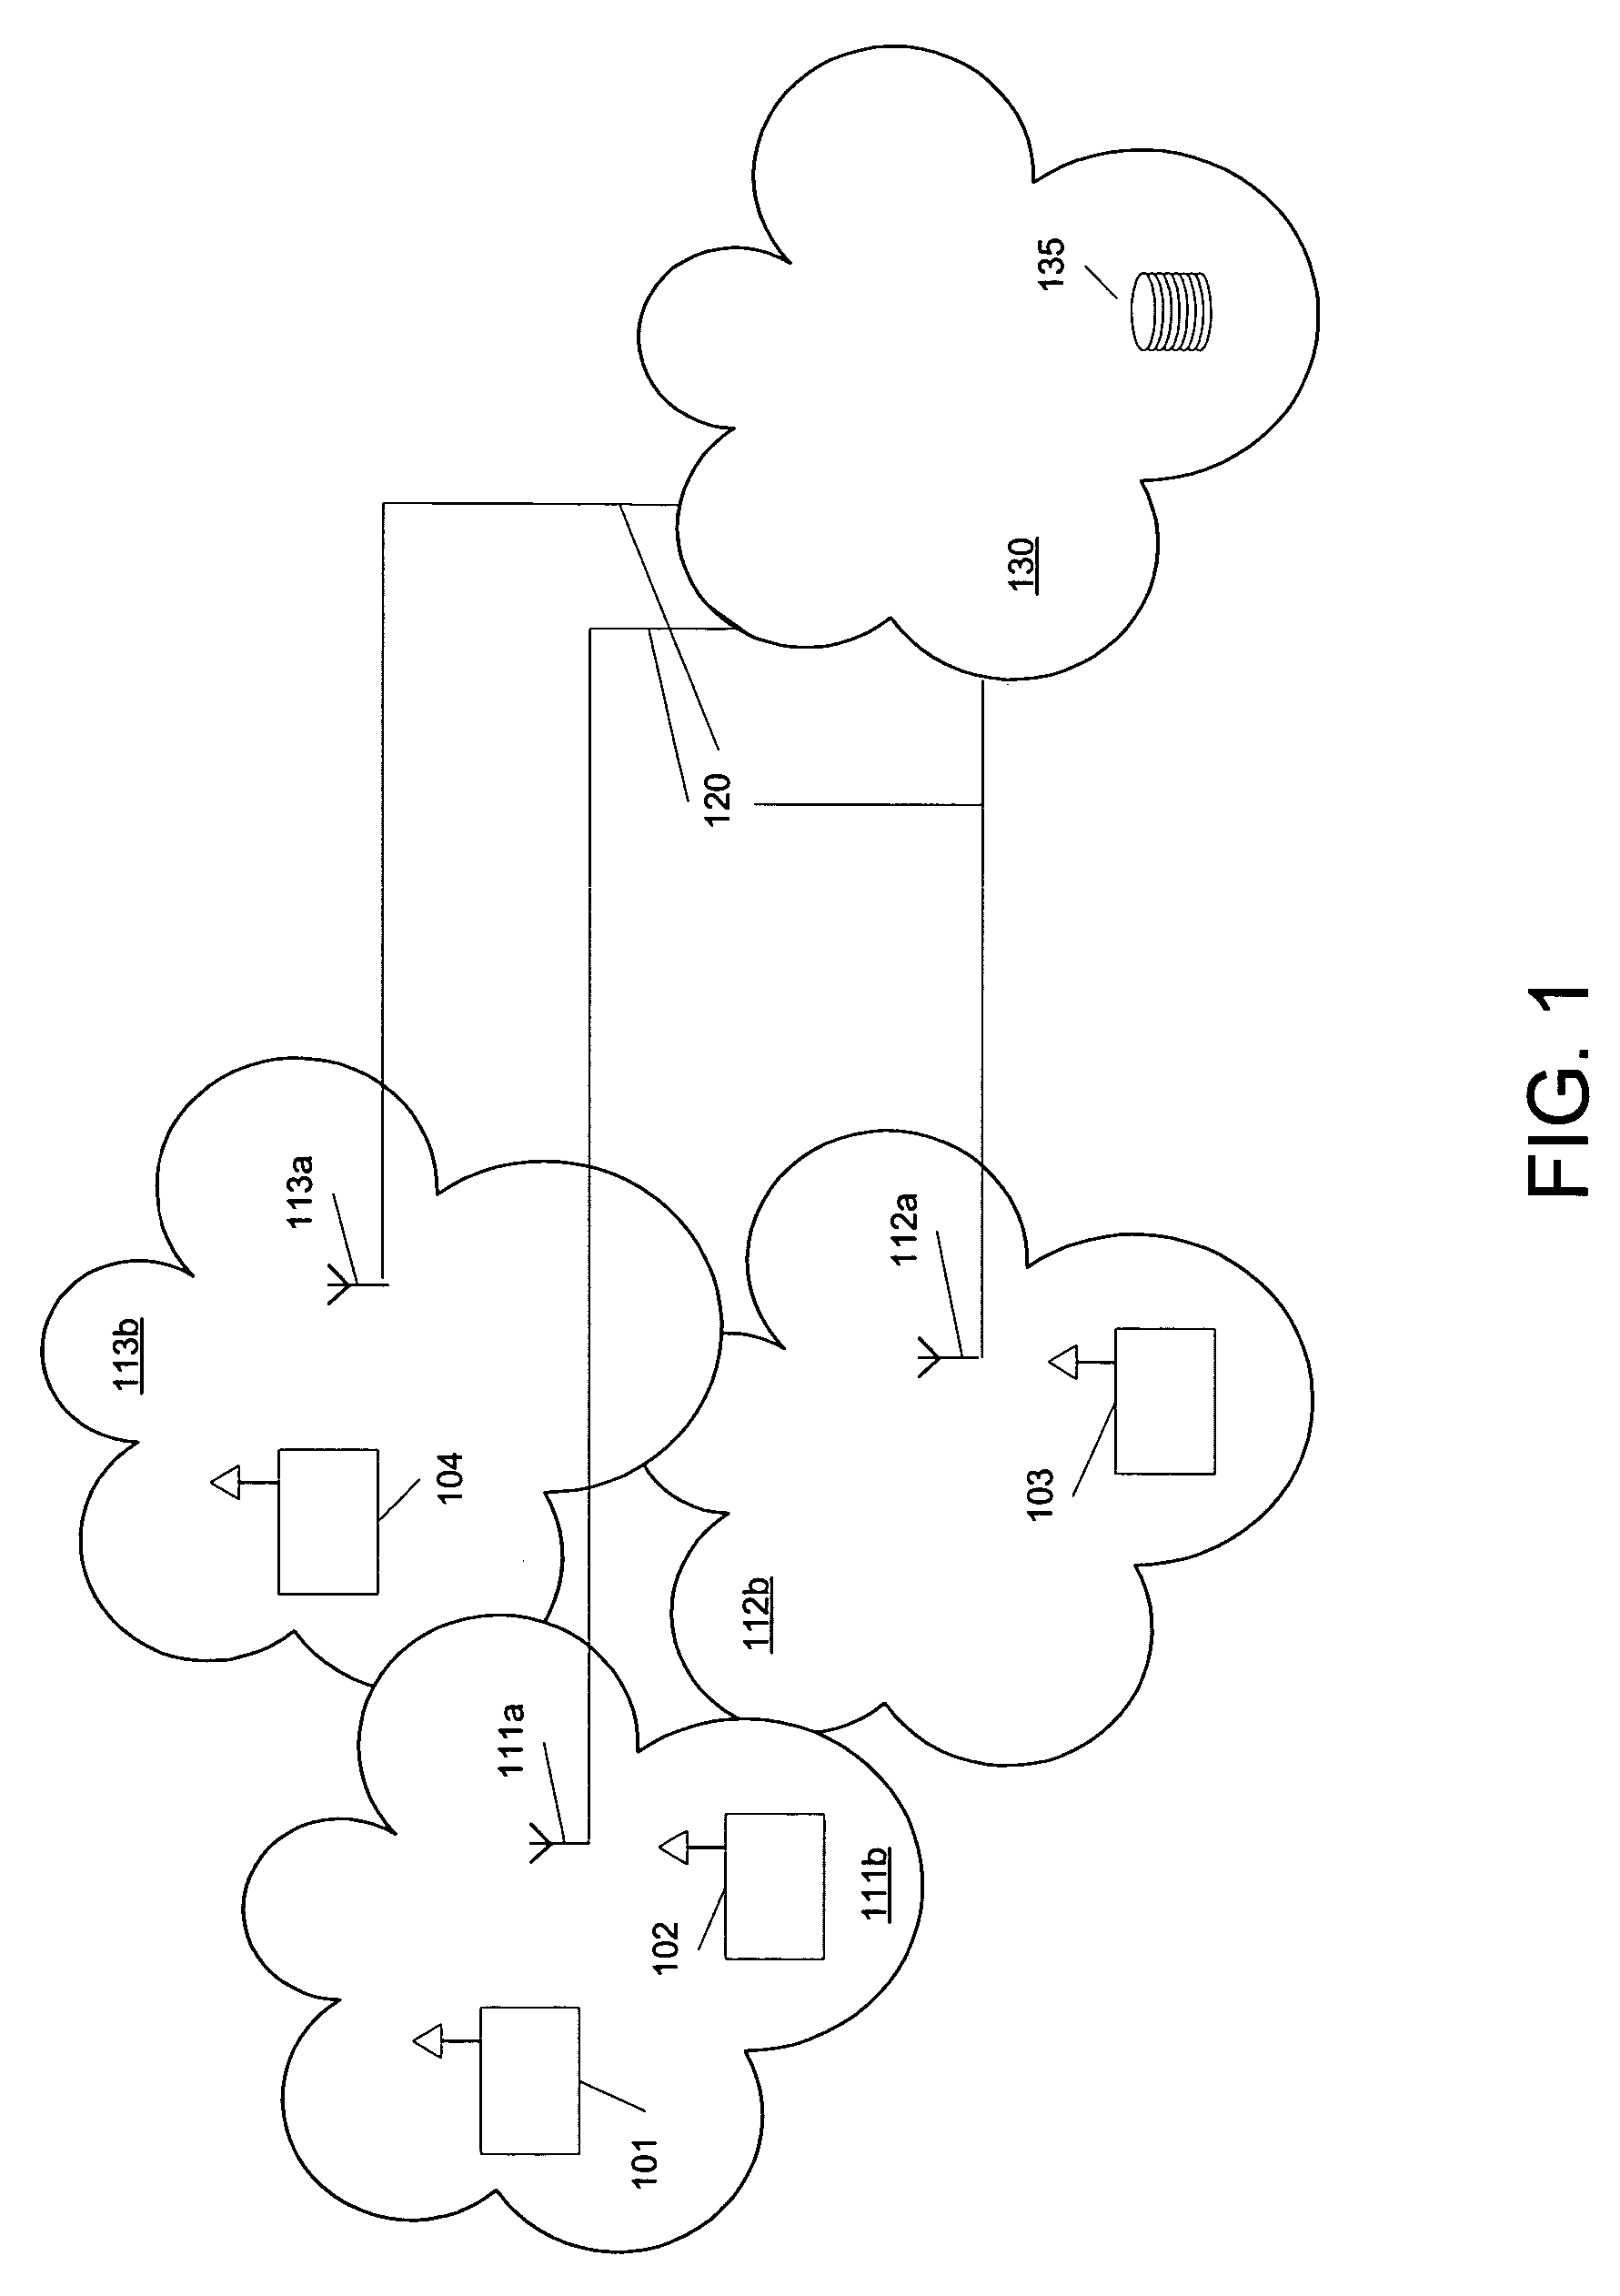 Method of creating incentives for using wireless hotspot locations